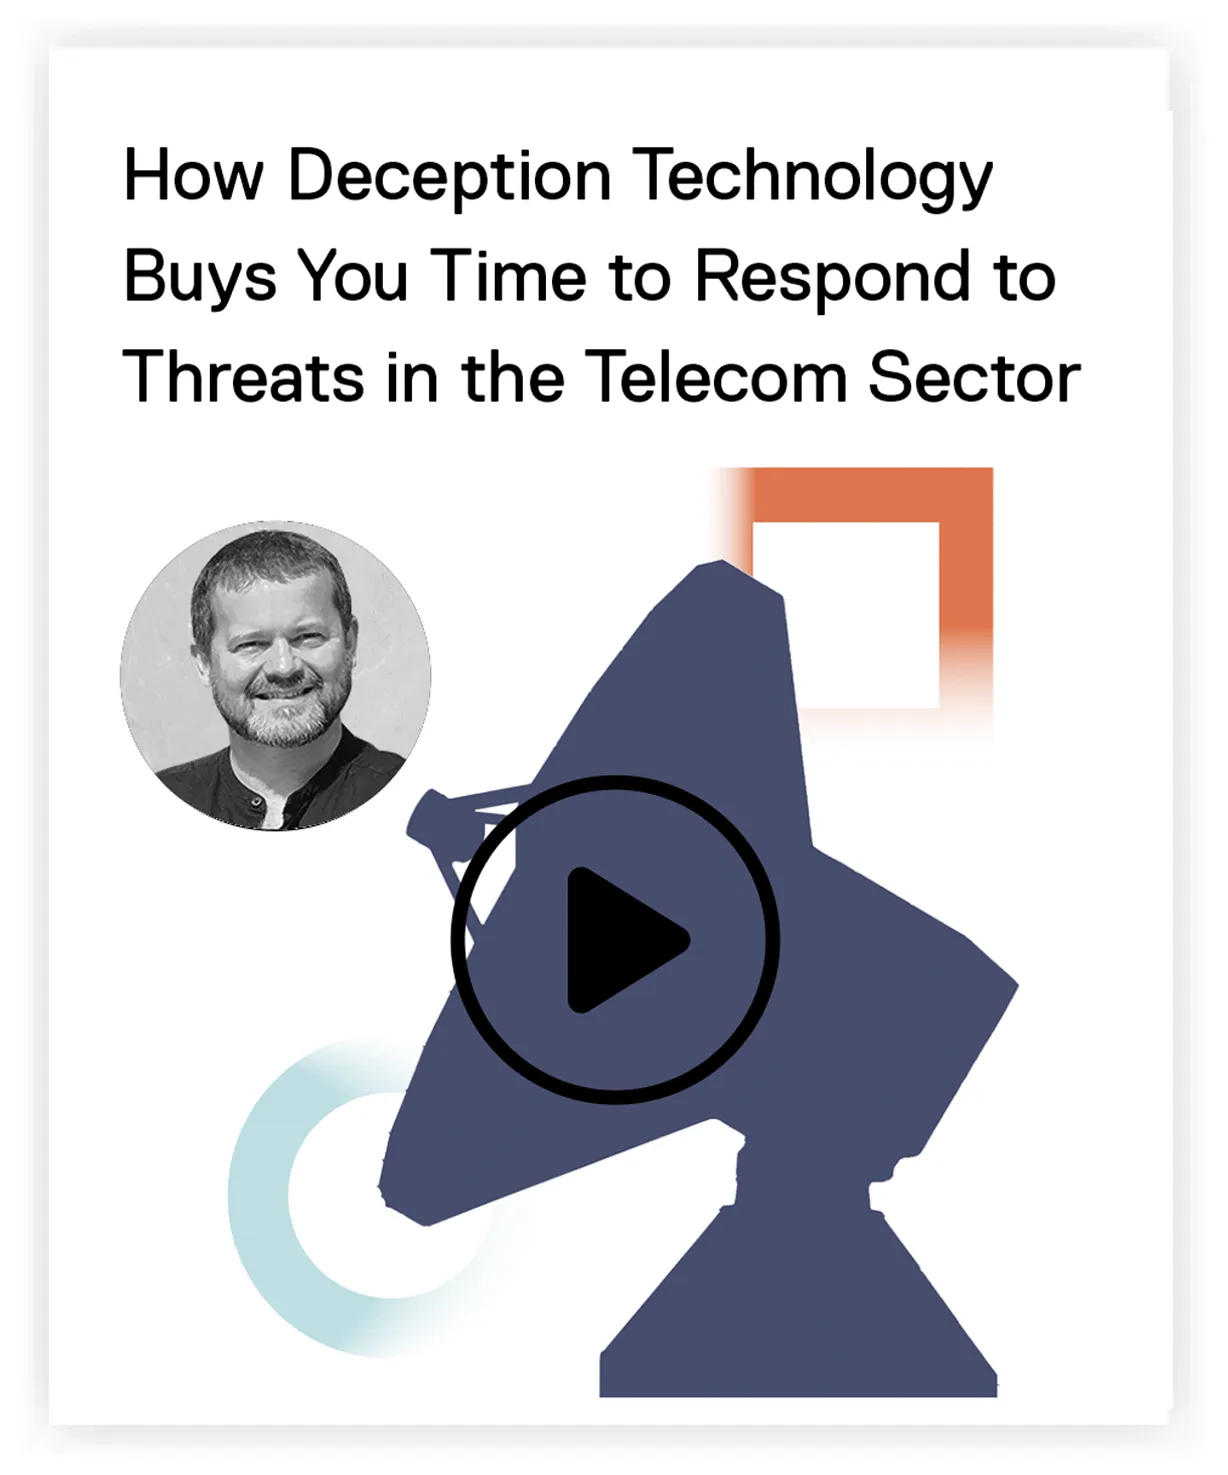 How deception technology buys you time to respond to threats in the Telecom sector?